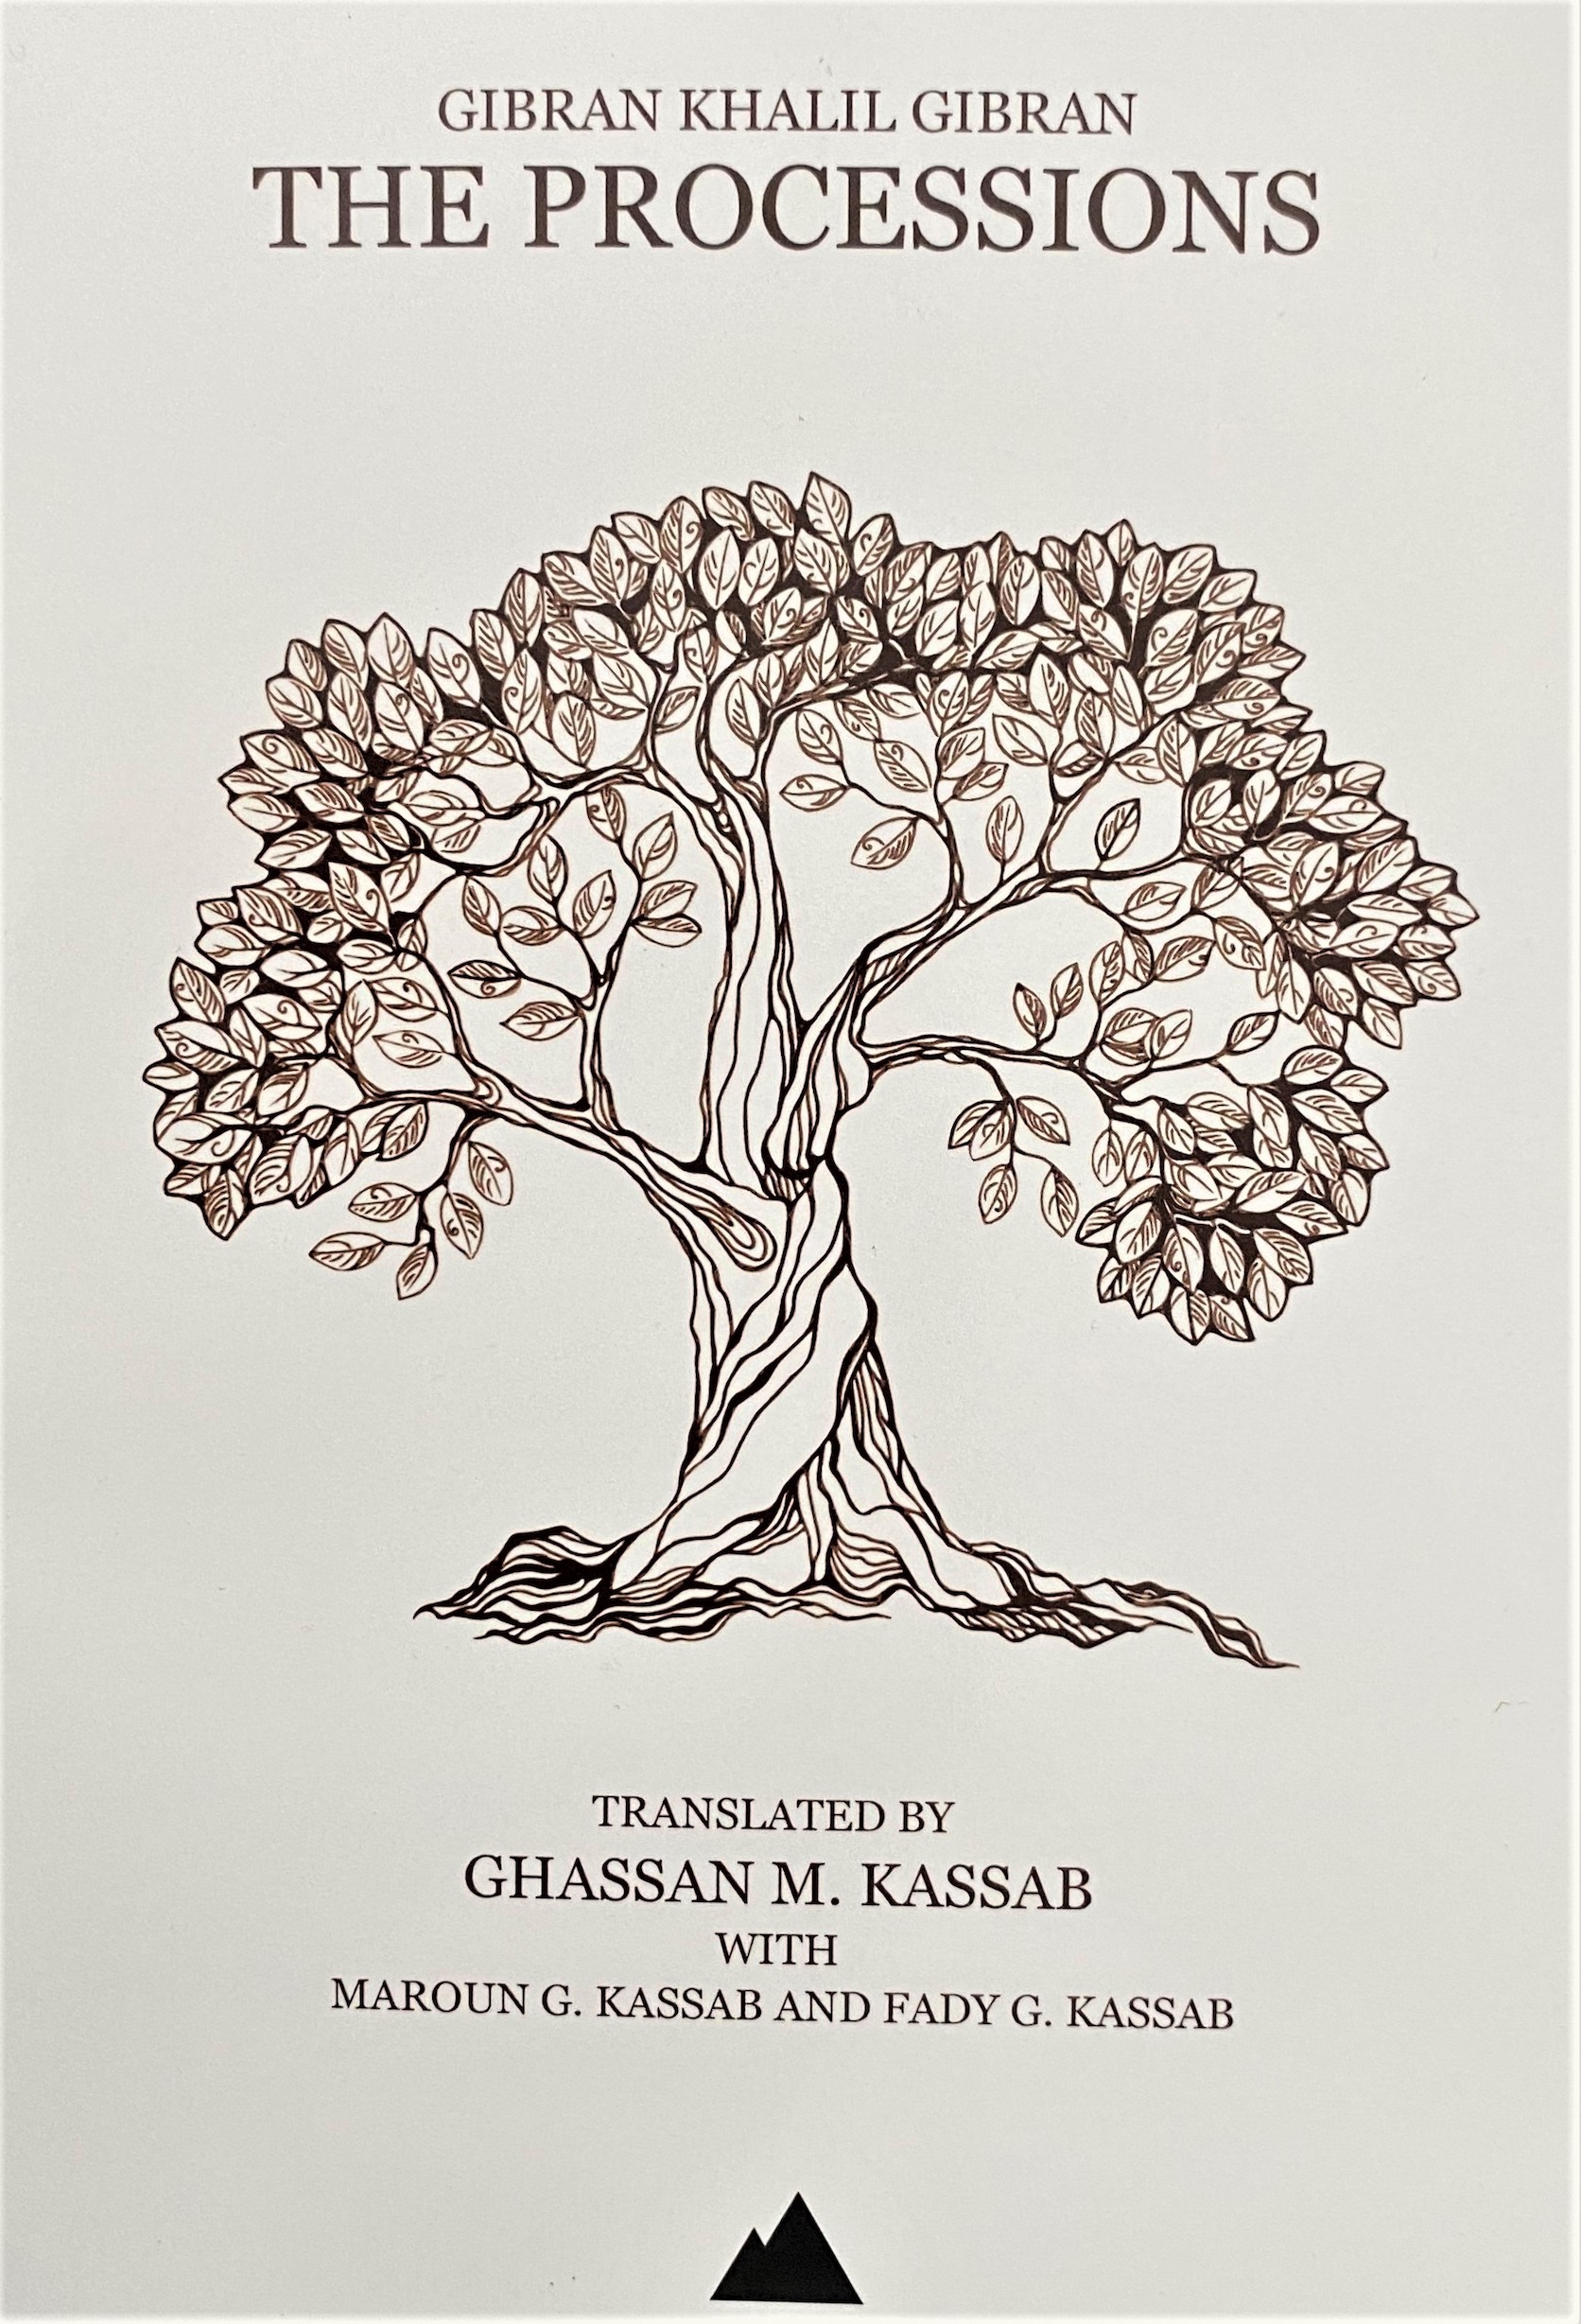 The Processions by Gibran Khalil Gibran, Translated by Ghassan M. Kassab